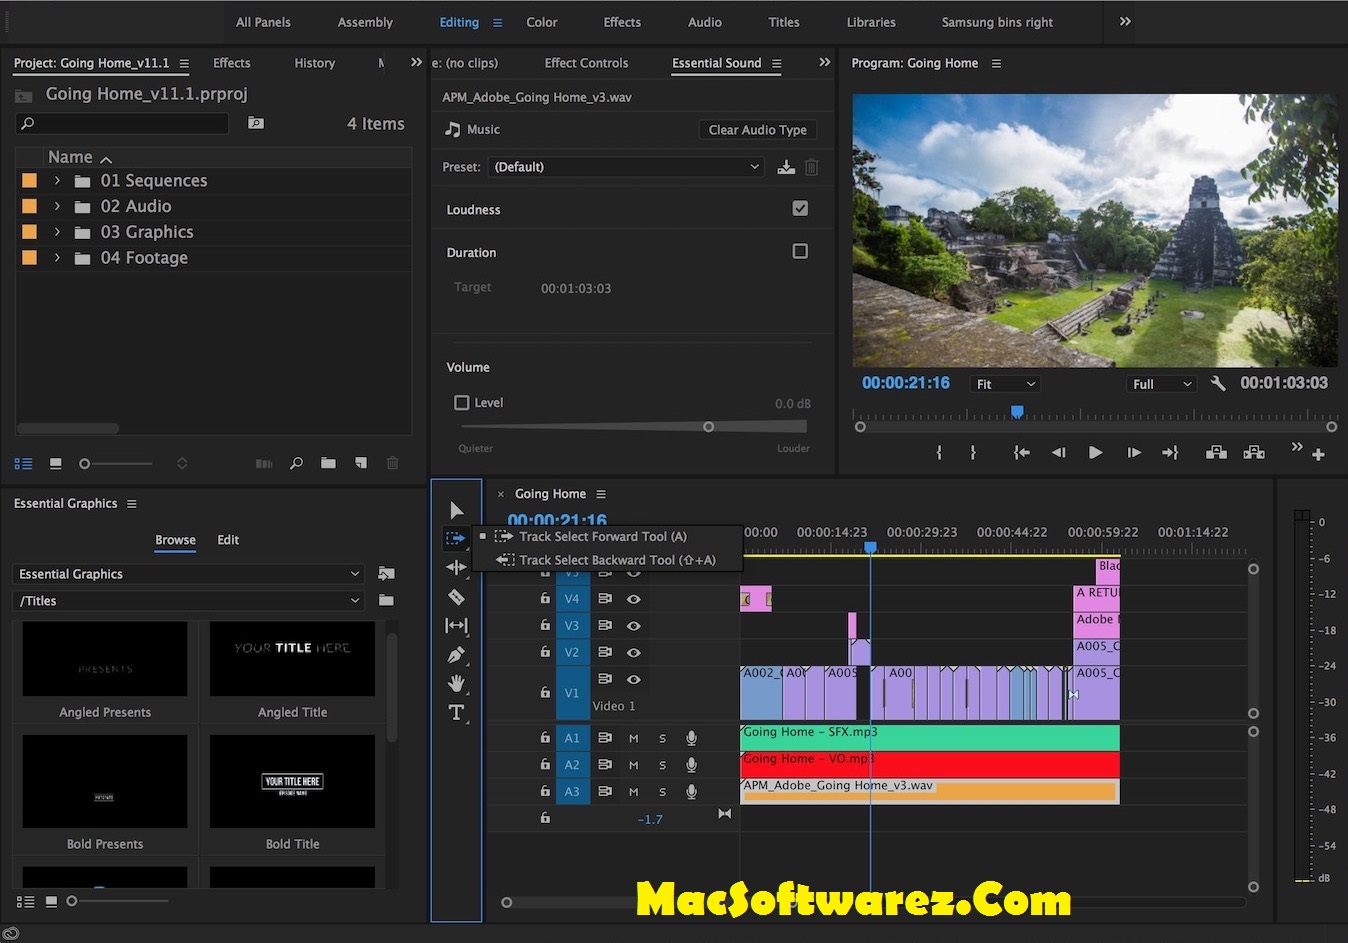 adobe premiere cc with crack download